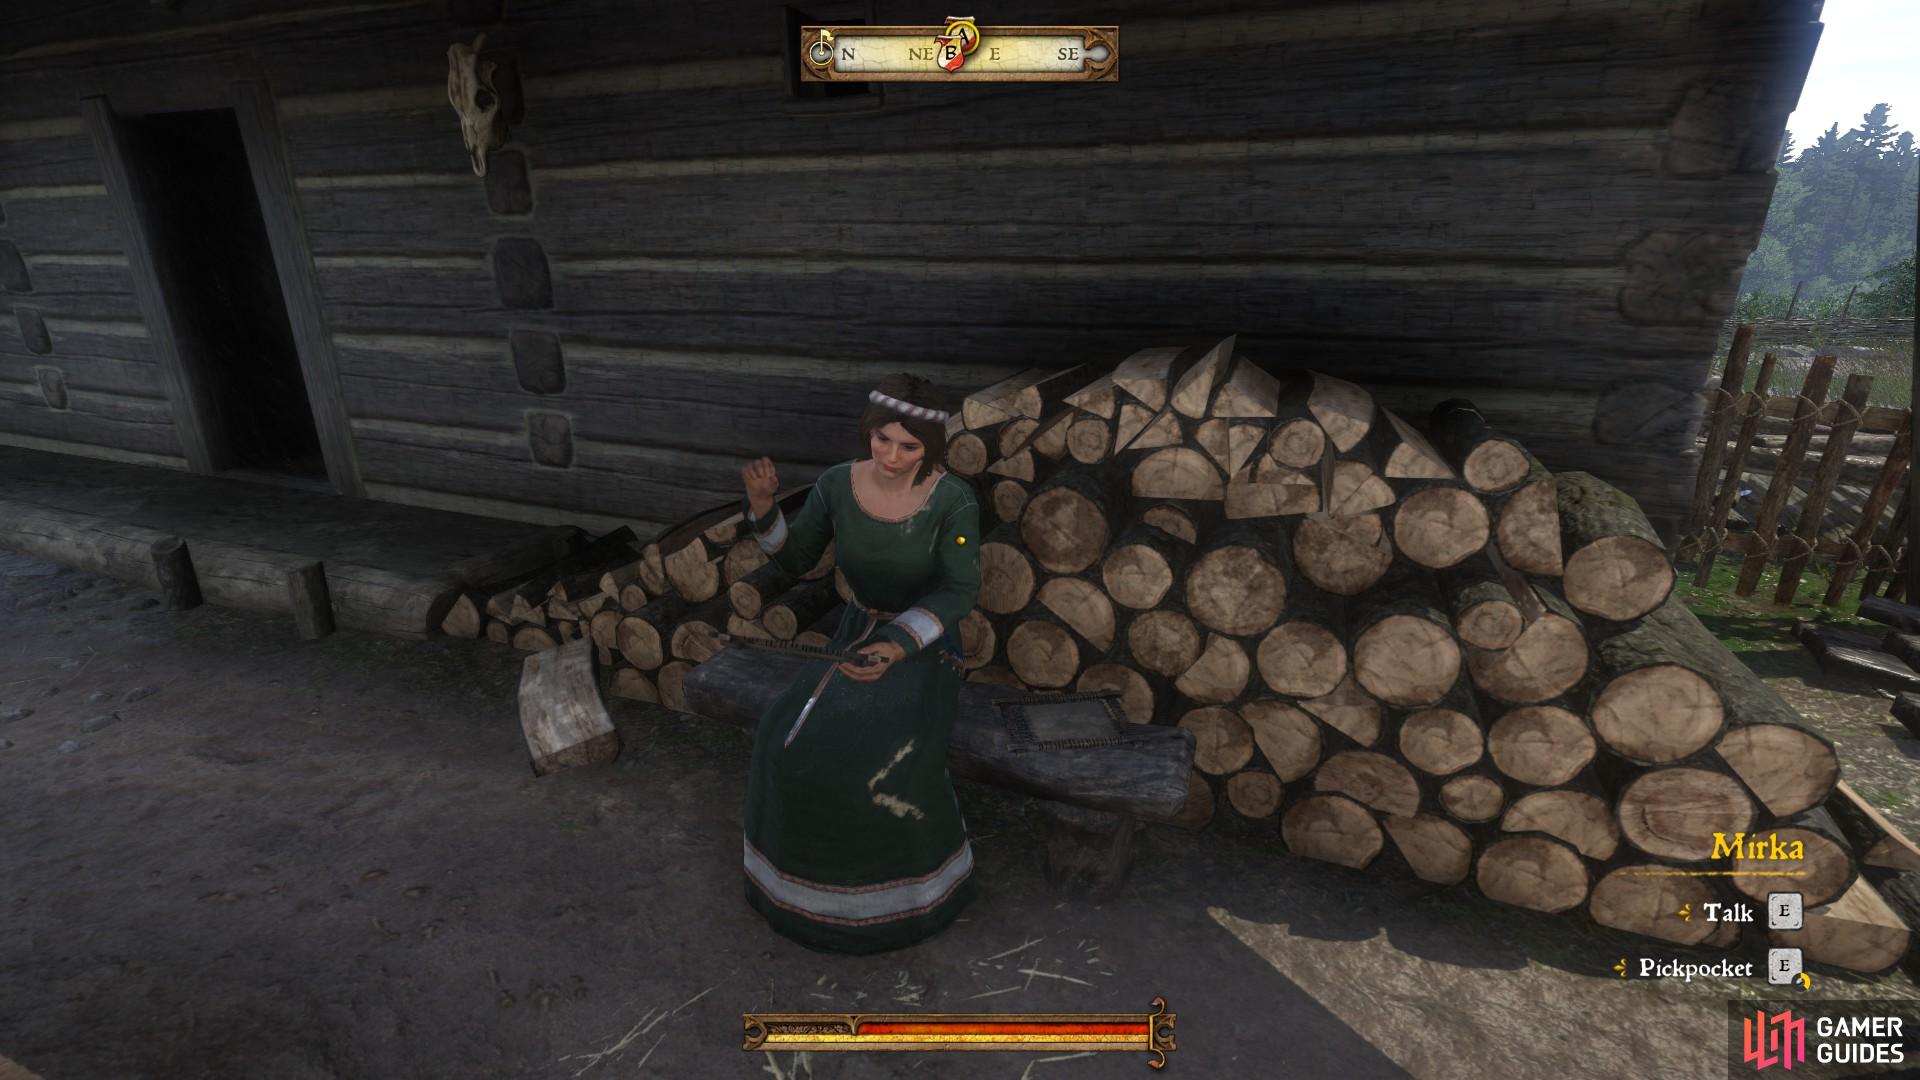 Mirka can usually be found outside the lodge in front of the log store.